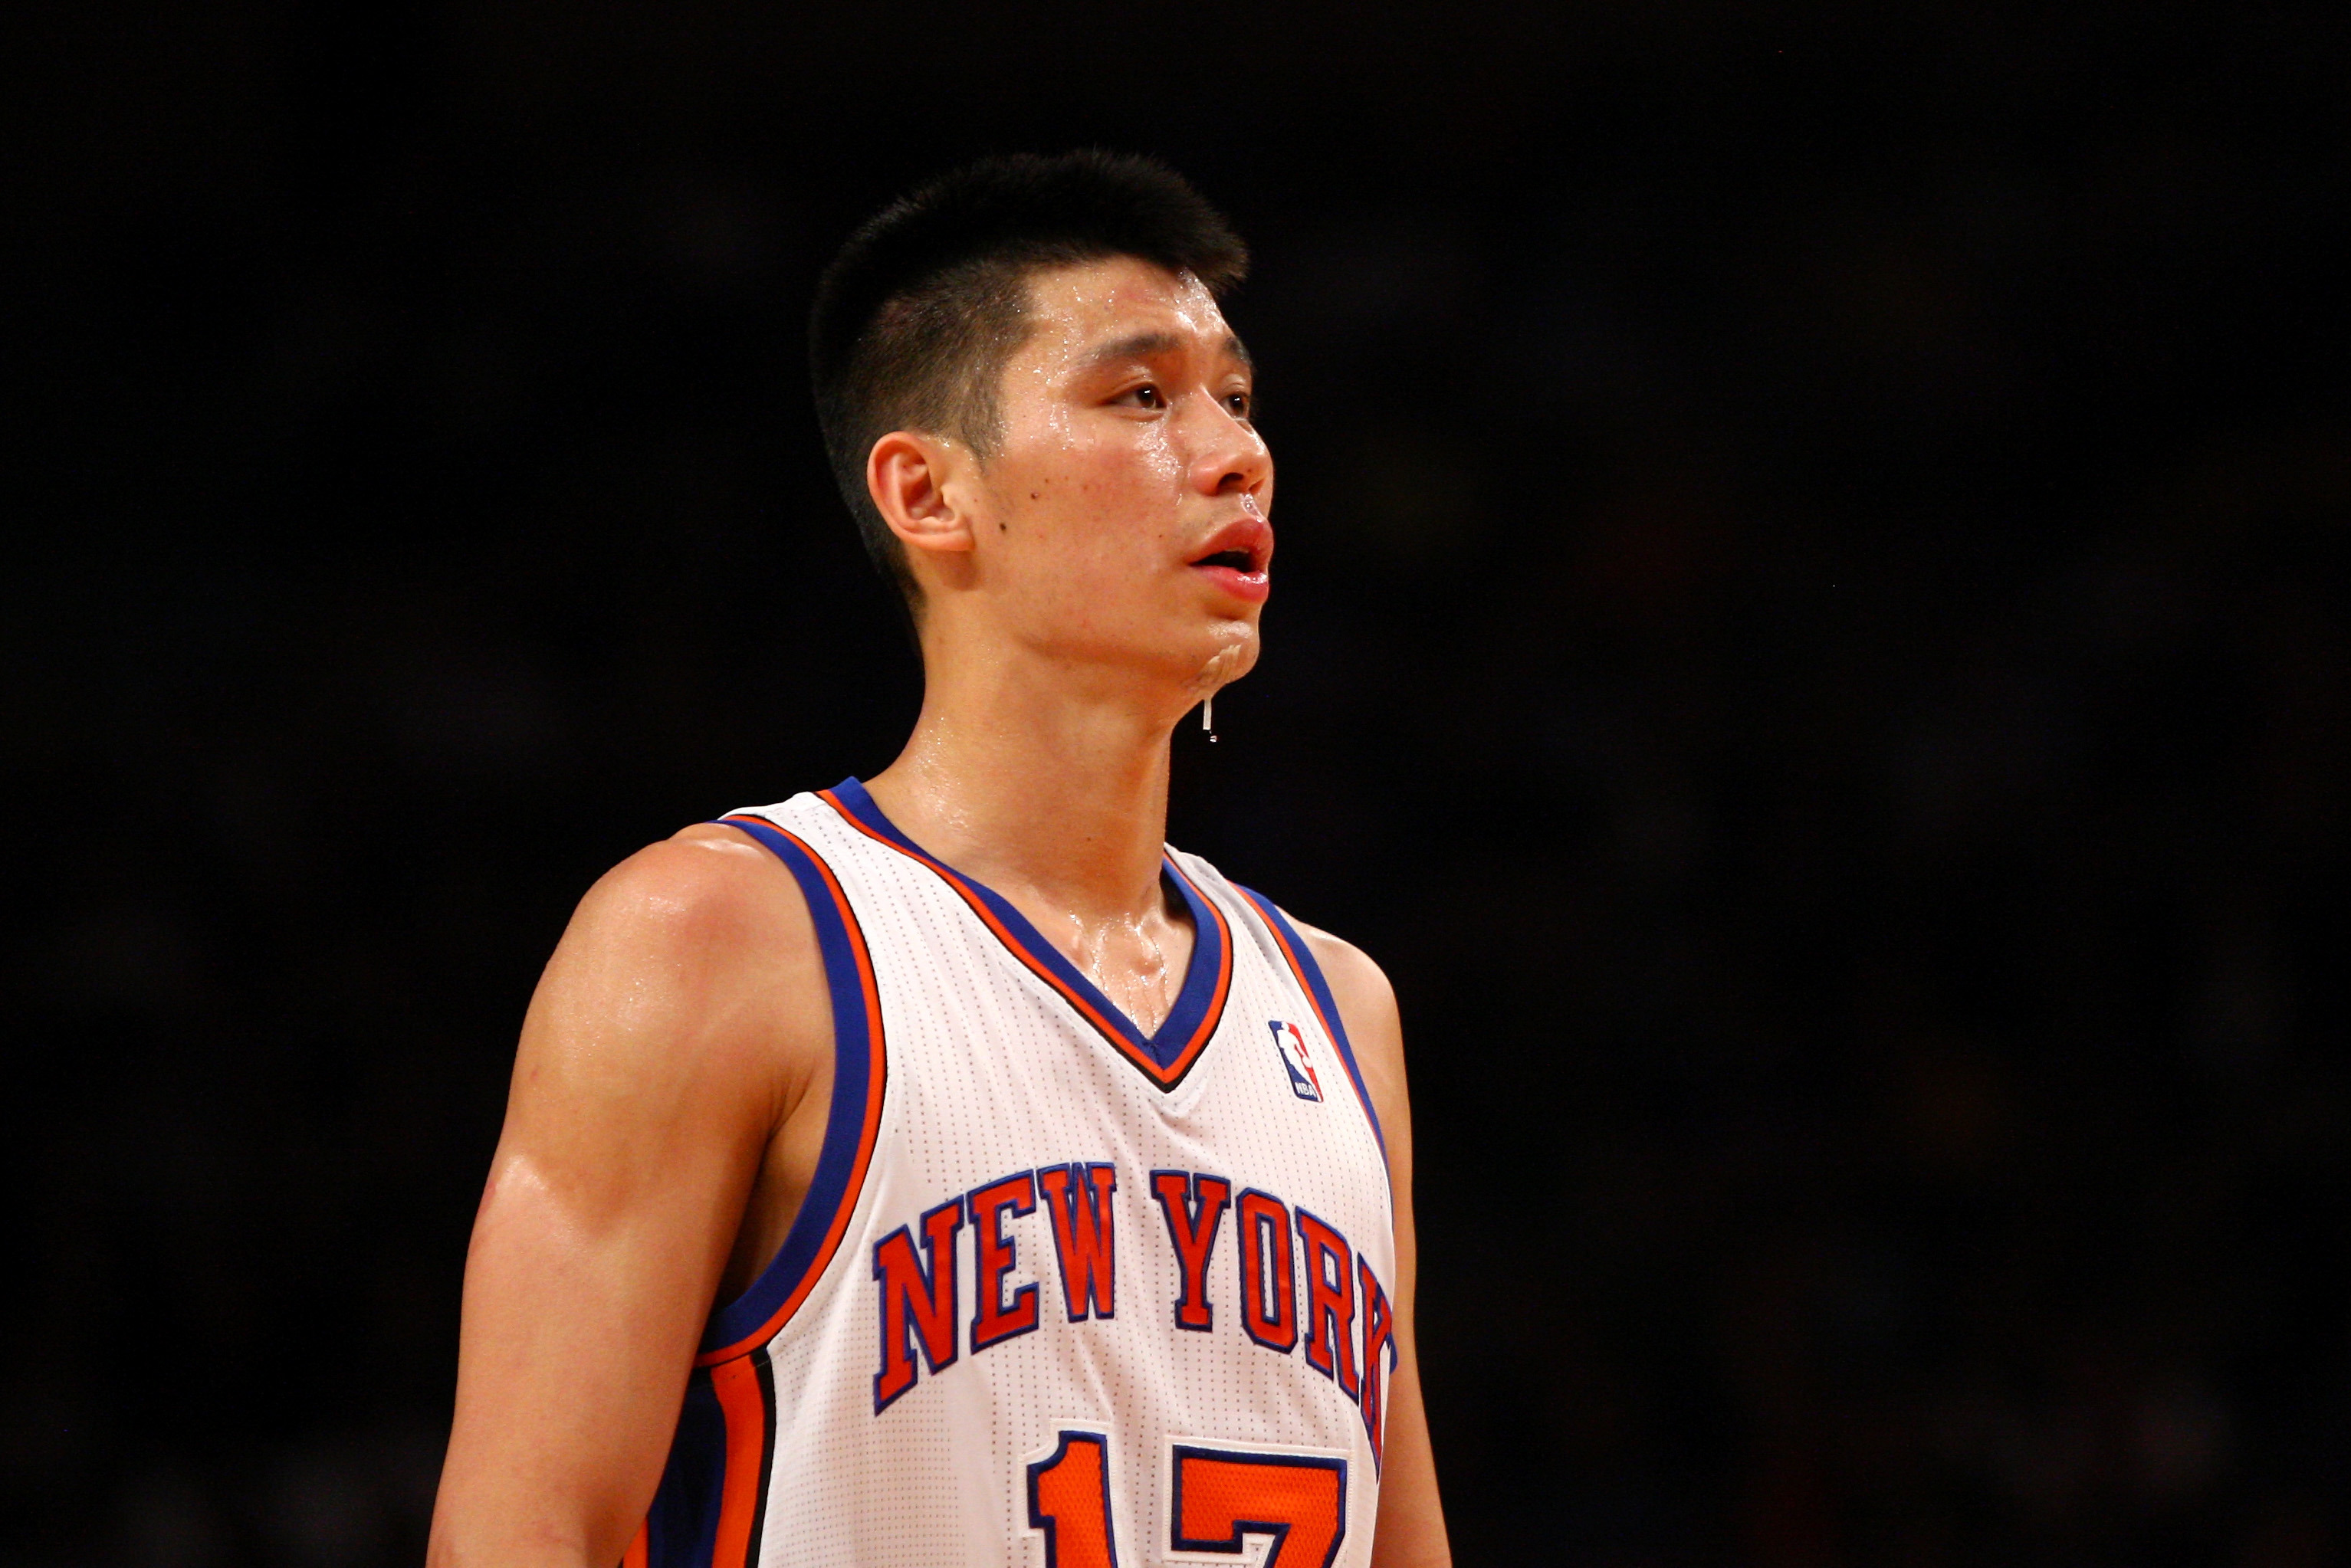 Jeremy Lin's stint with Lakers a stark contrast from “Linsanity